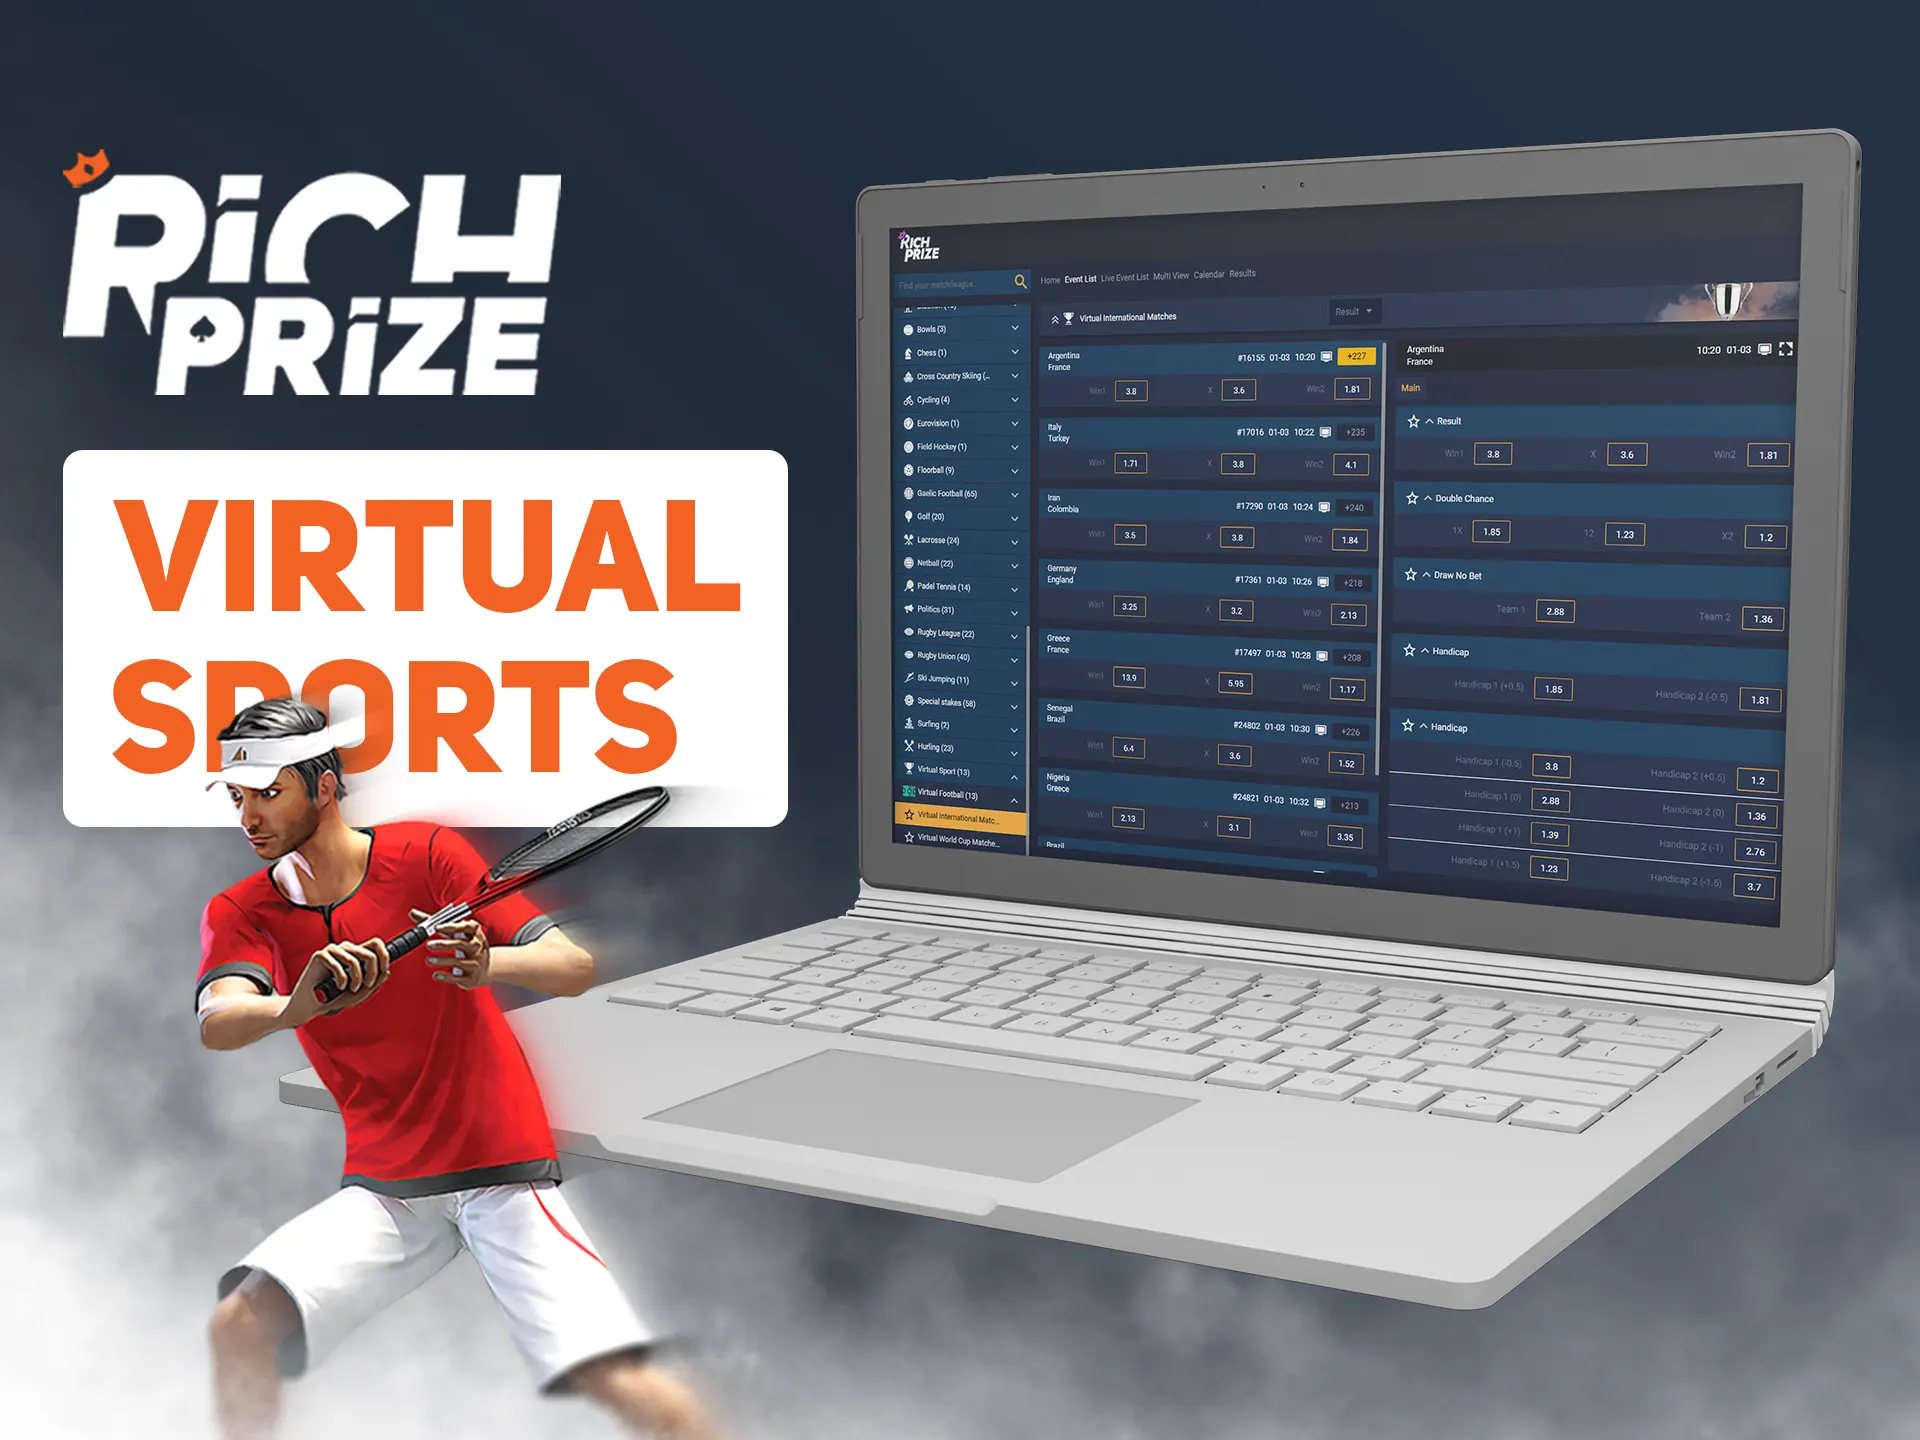 Virtual sports is a new way of Richprize betting.